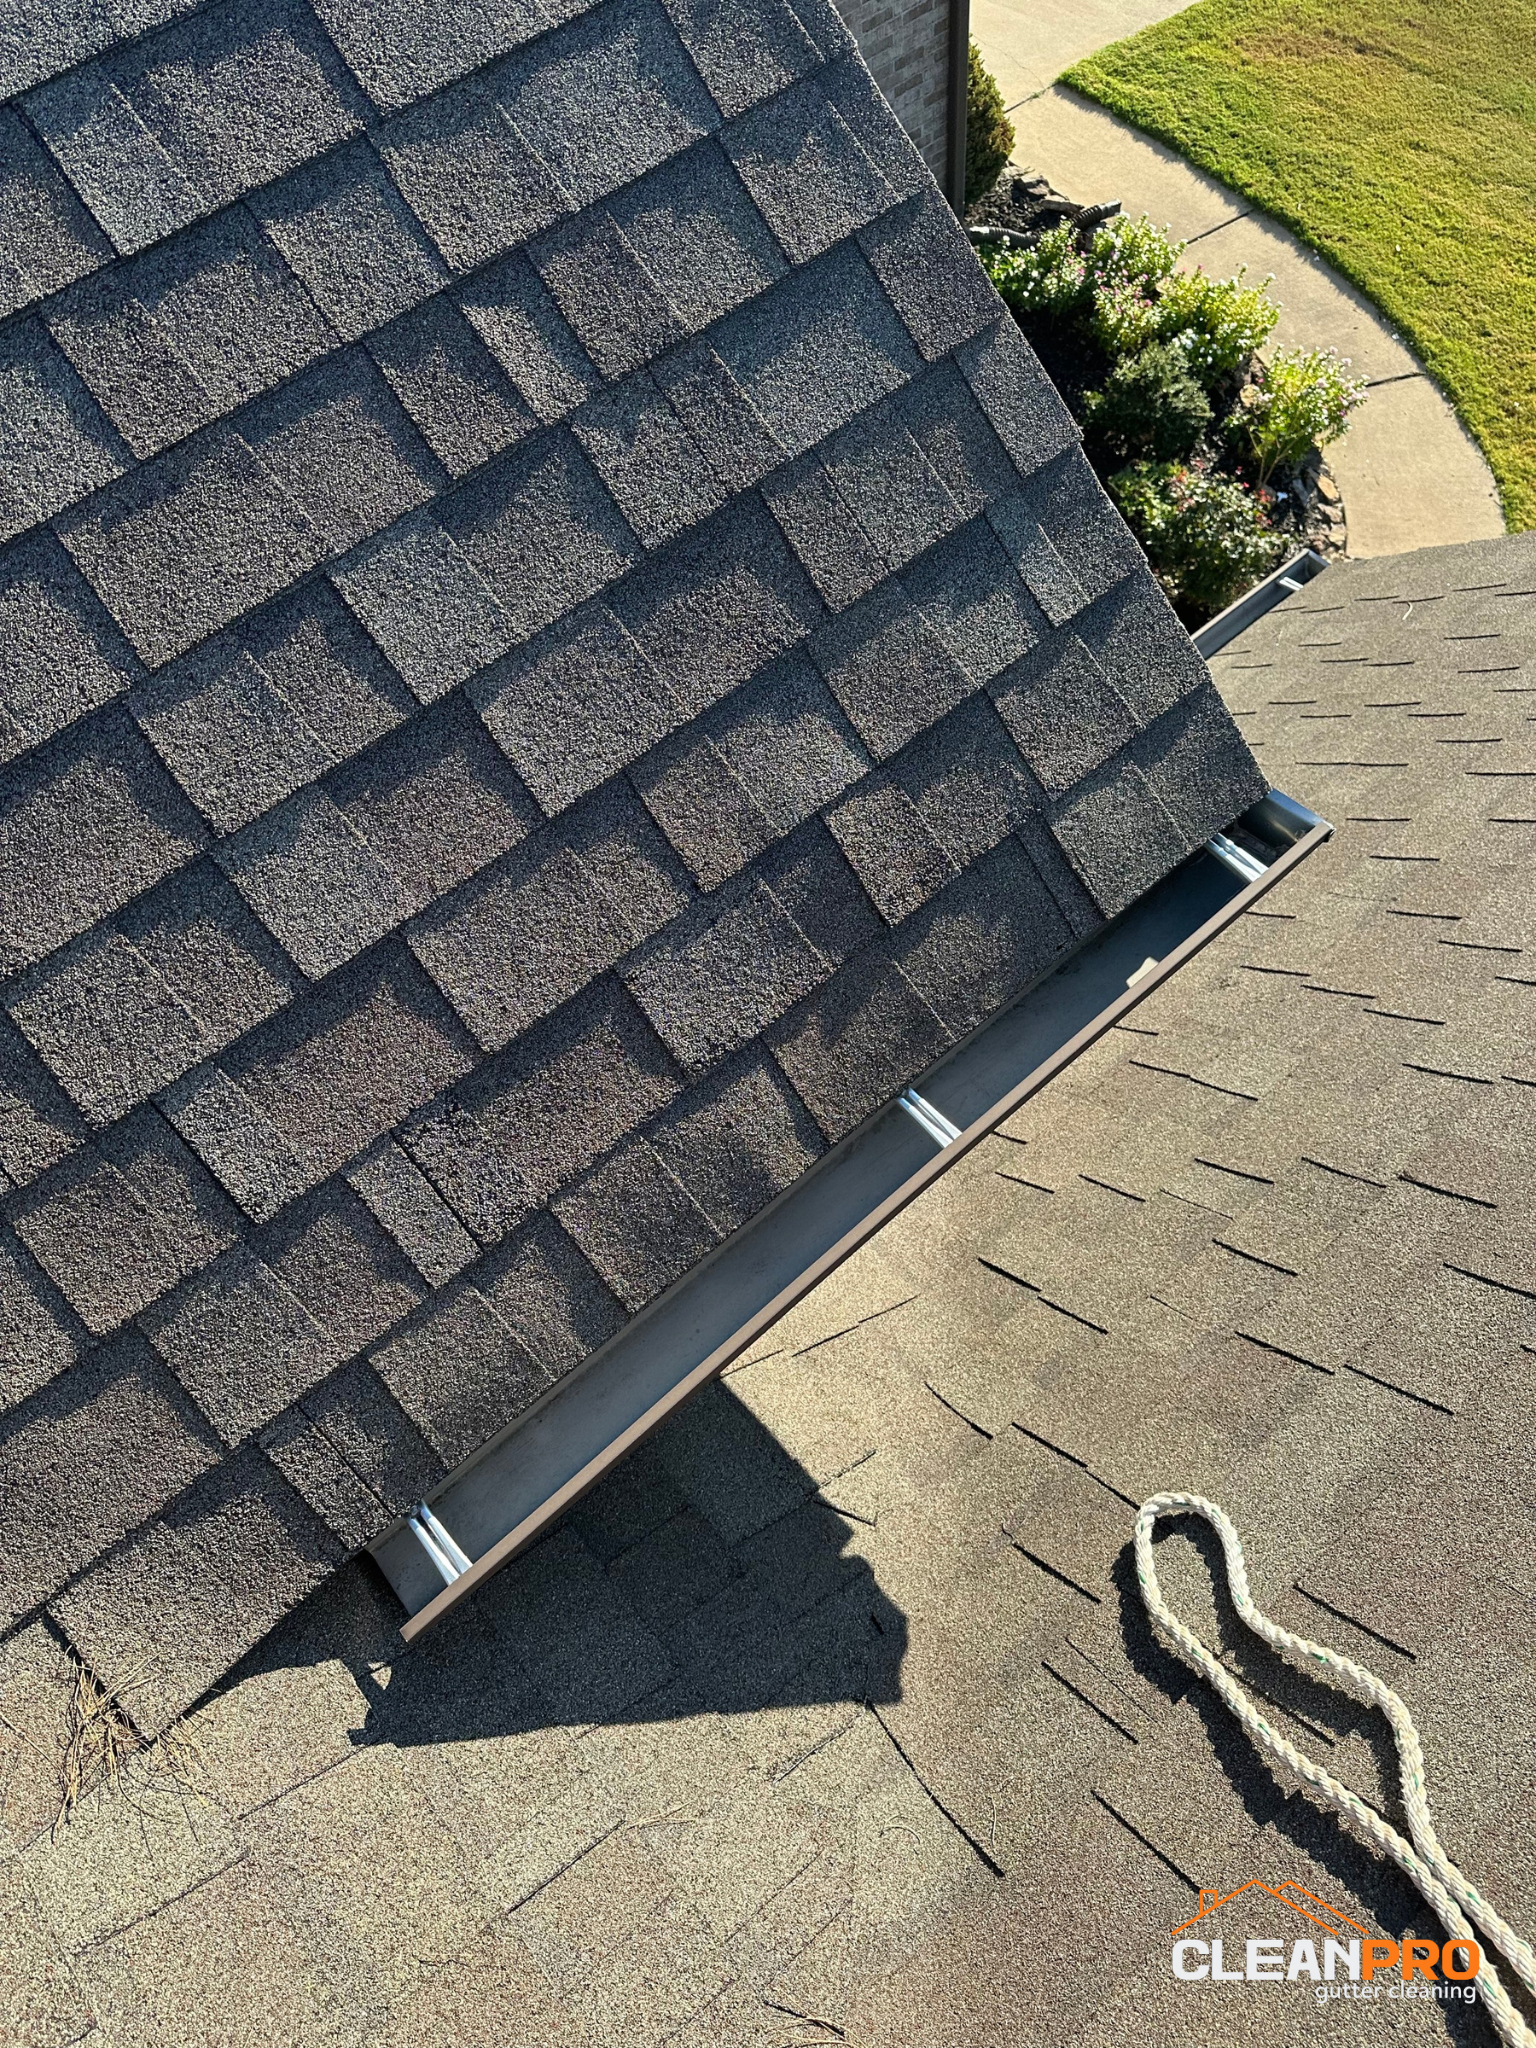 Residential Gutter Cleaning in Greensboro NC